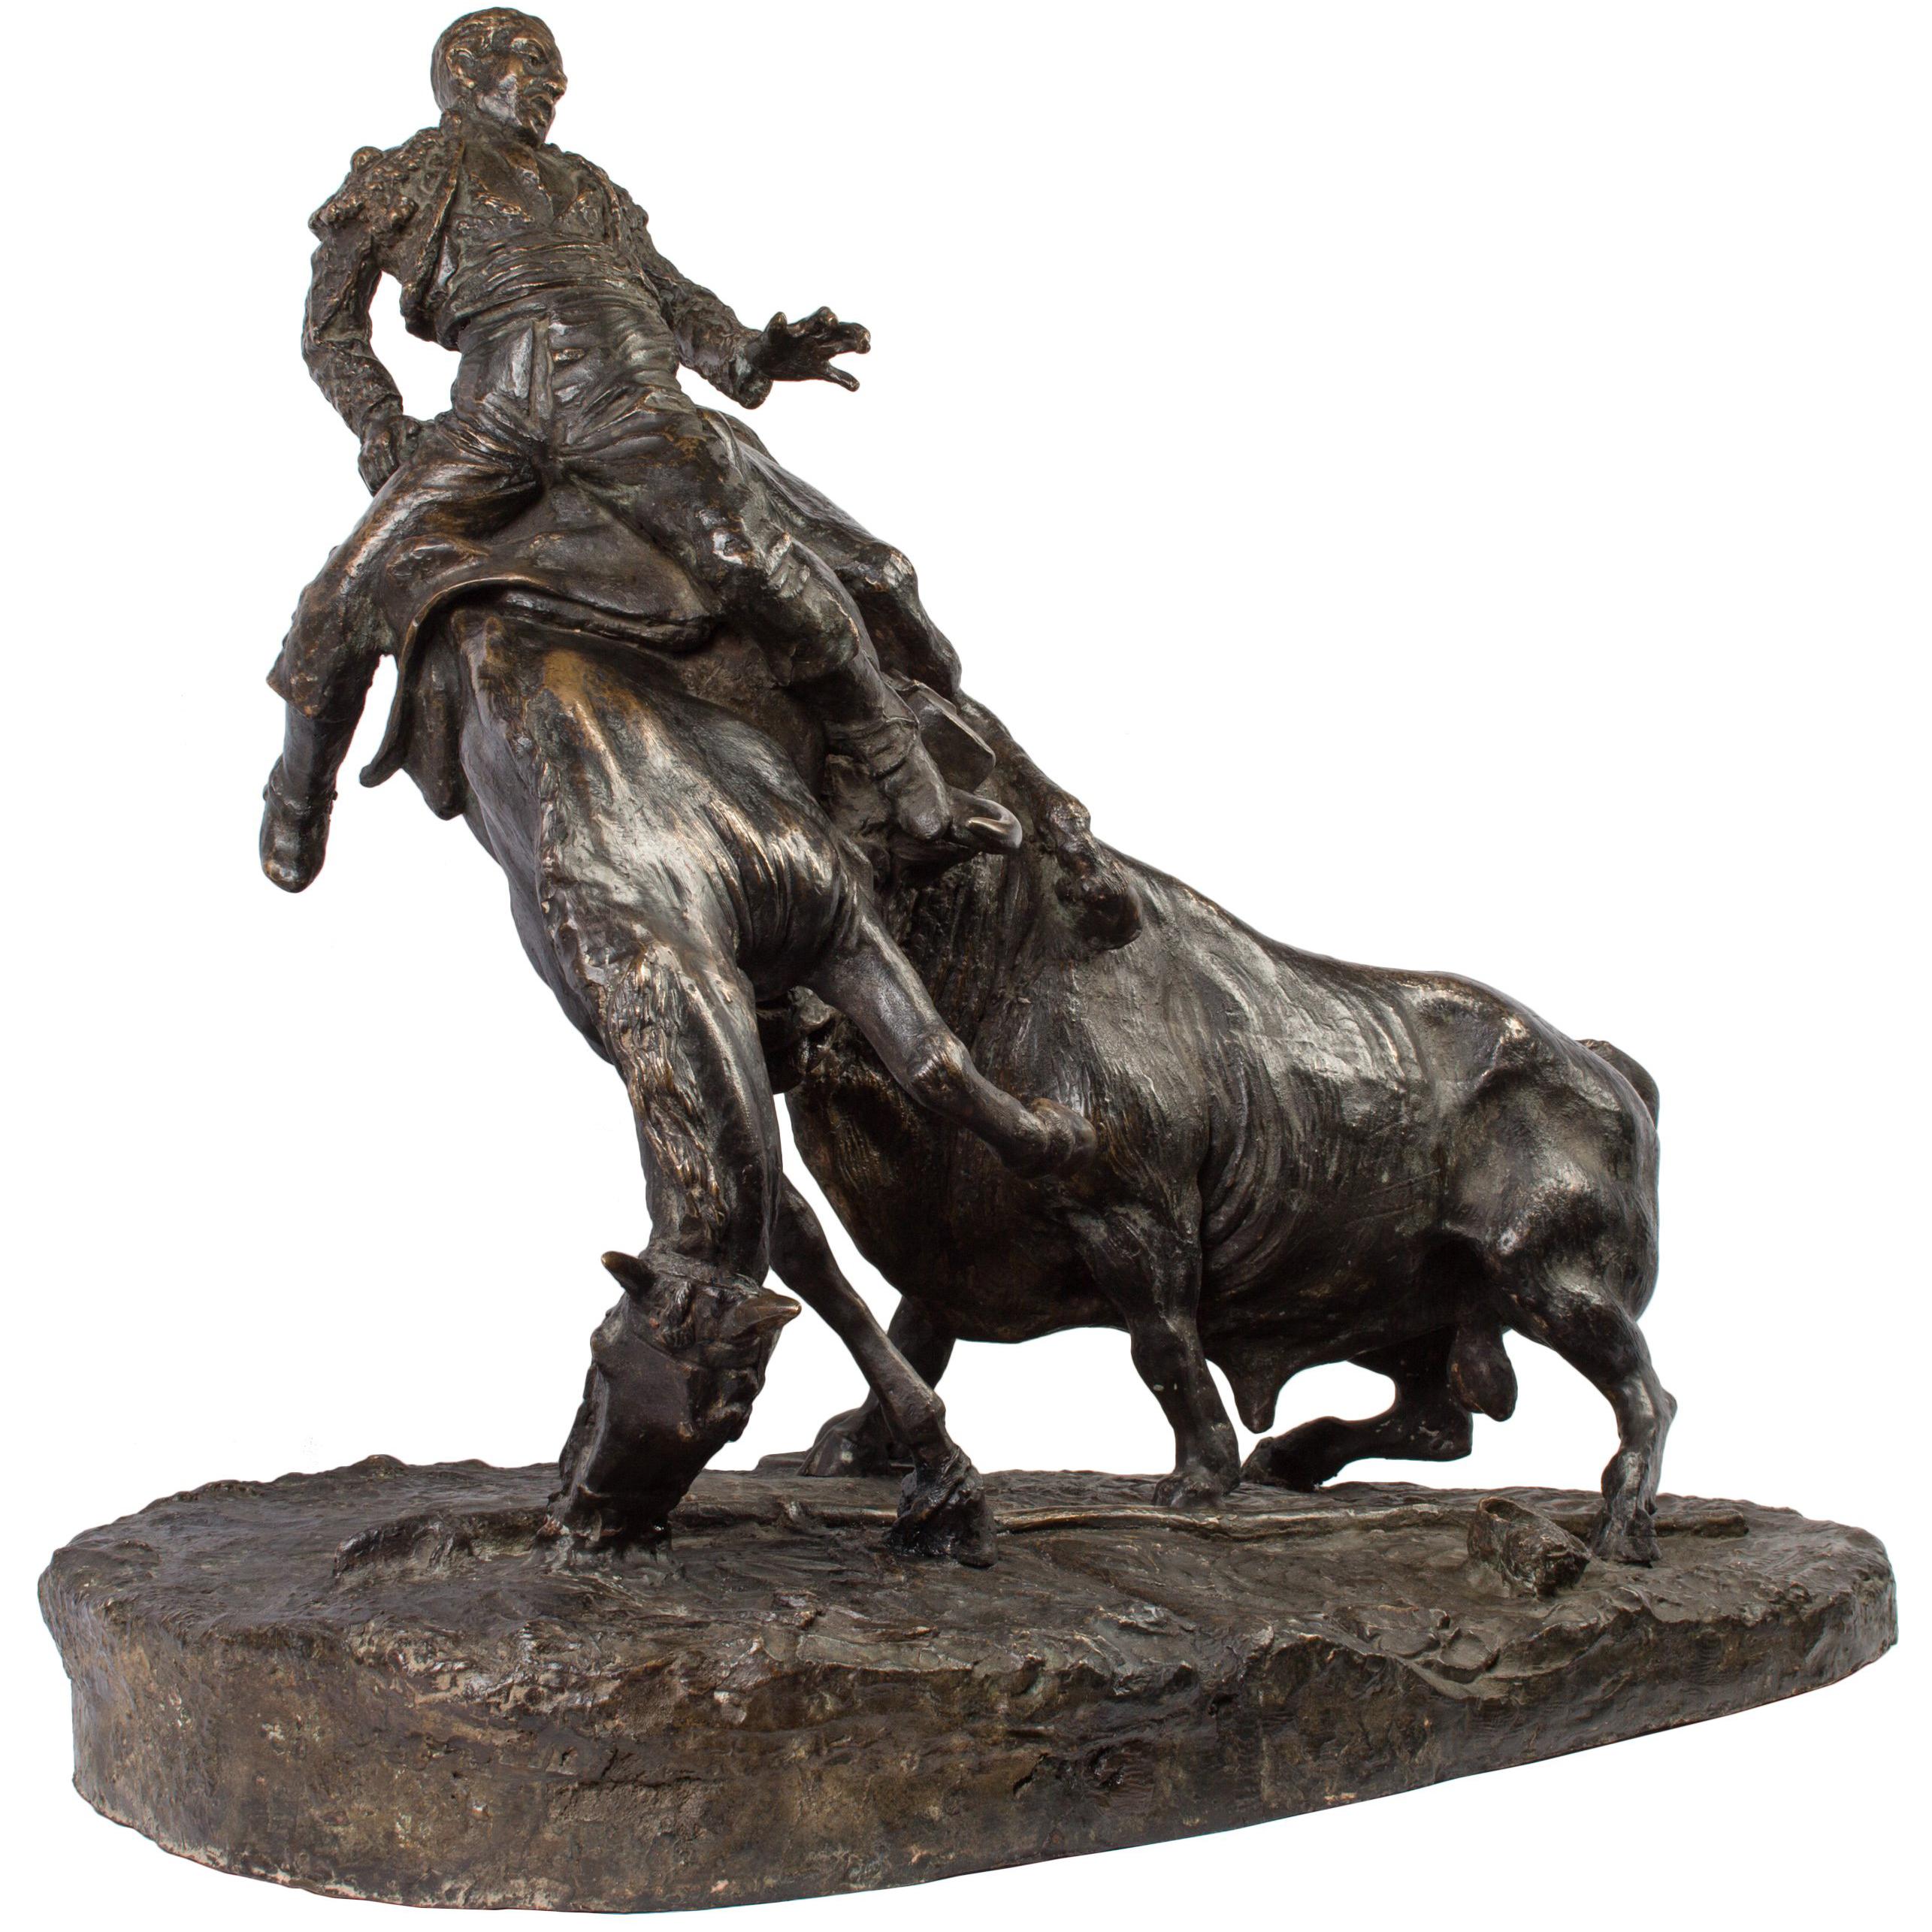 This highly dynamic bronze of a bull attacking a picador on horseback was created by Spanish sculptor Juan Polo Velasco in 1948. Born in the Andalucian city of Fernán Núñez in 1923, Juan Polo began sculpting at a young age, attended art schools in